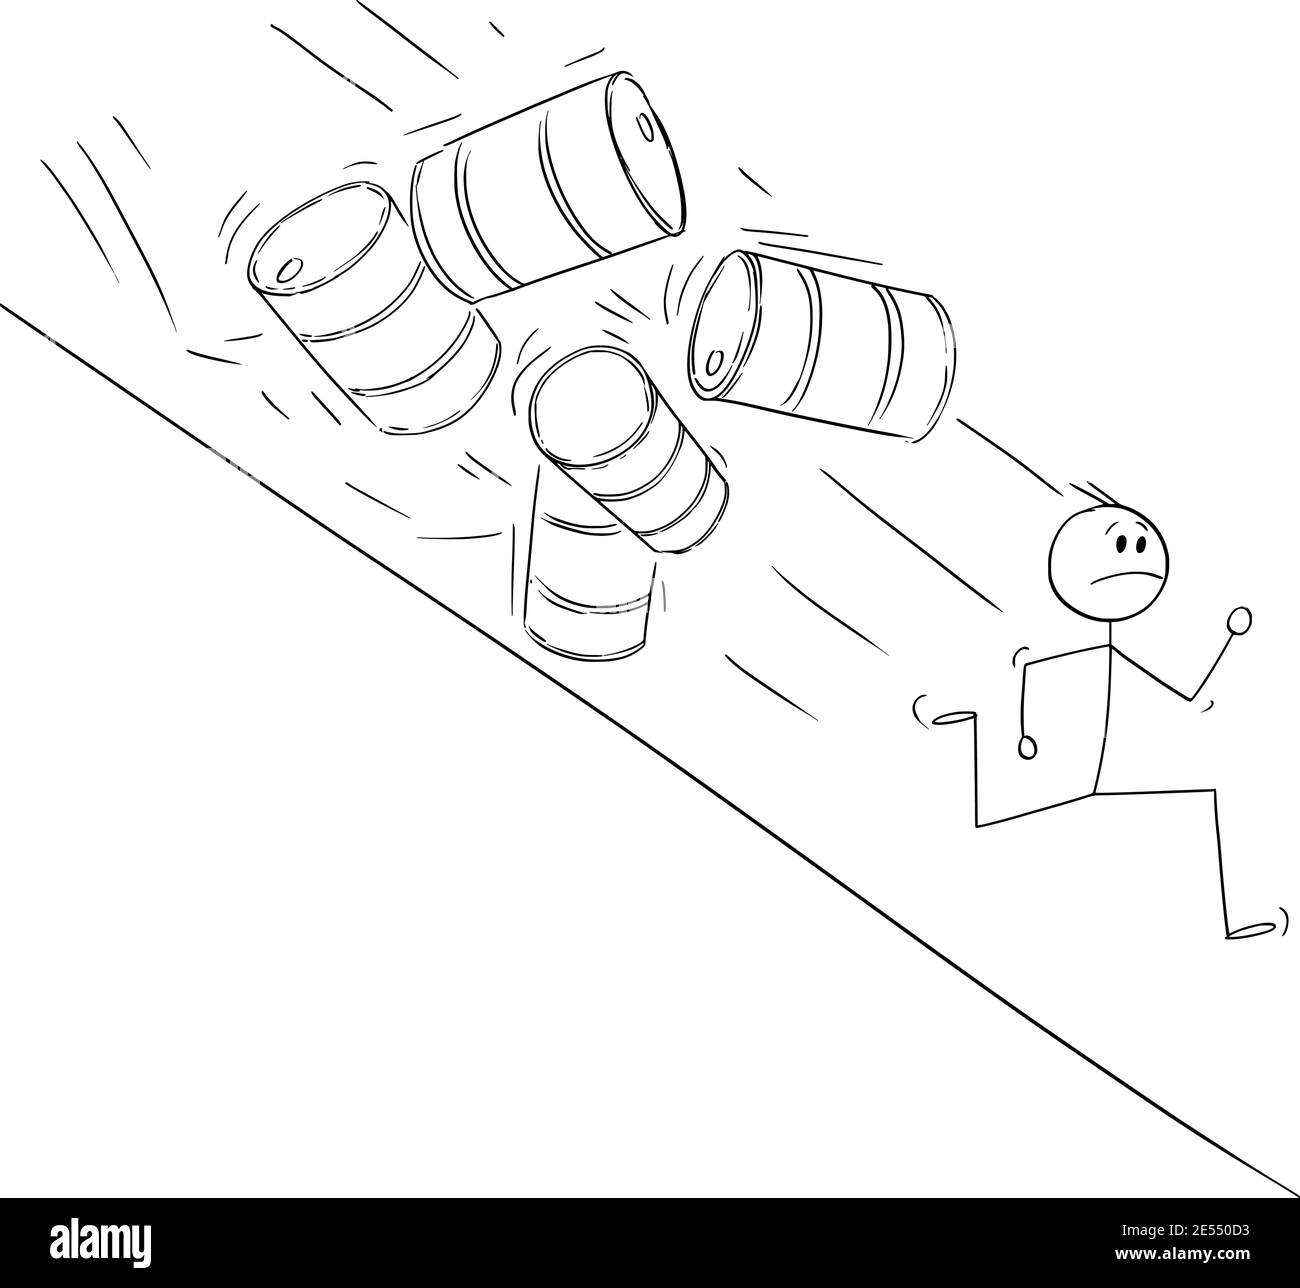 Businessman,investor or oilman running in panic from oil barrels falling downhill, concept of falling prices on market or crisis, vector cartoon stick figure or character illustration. Stock Vector